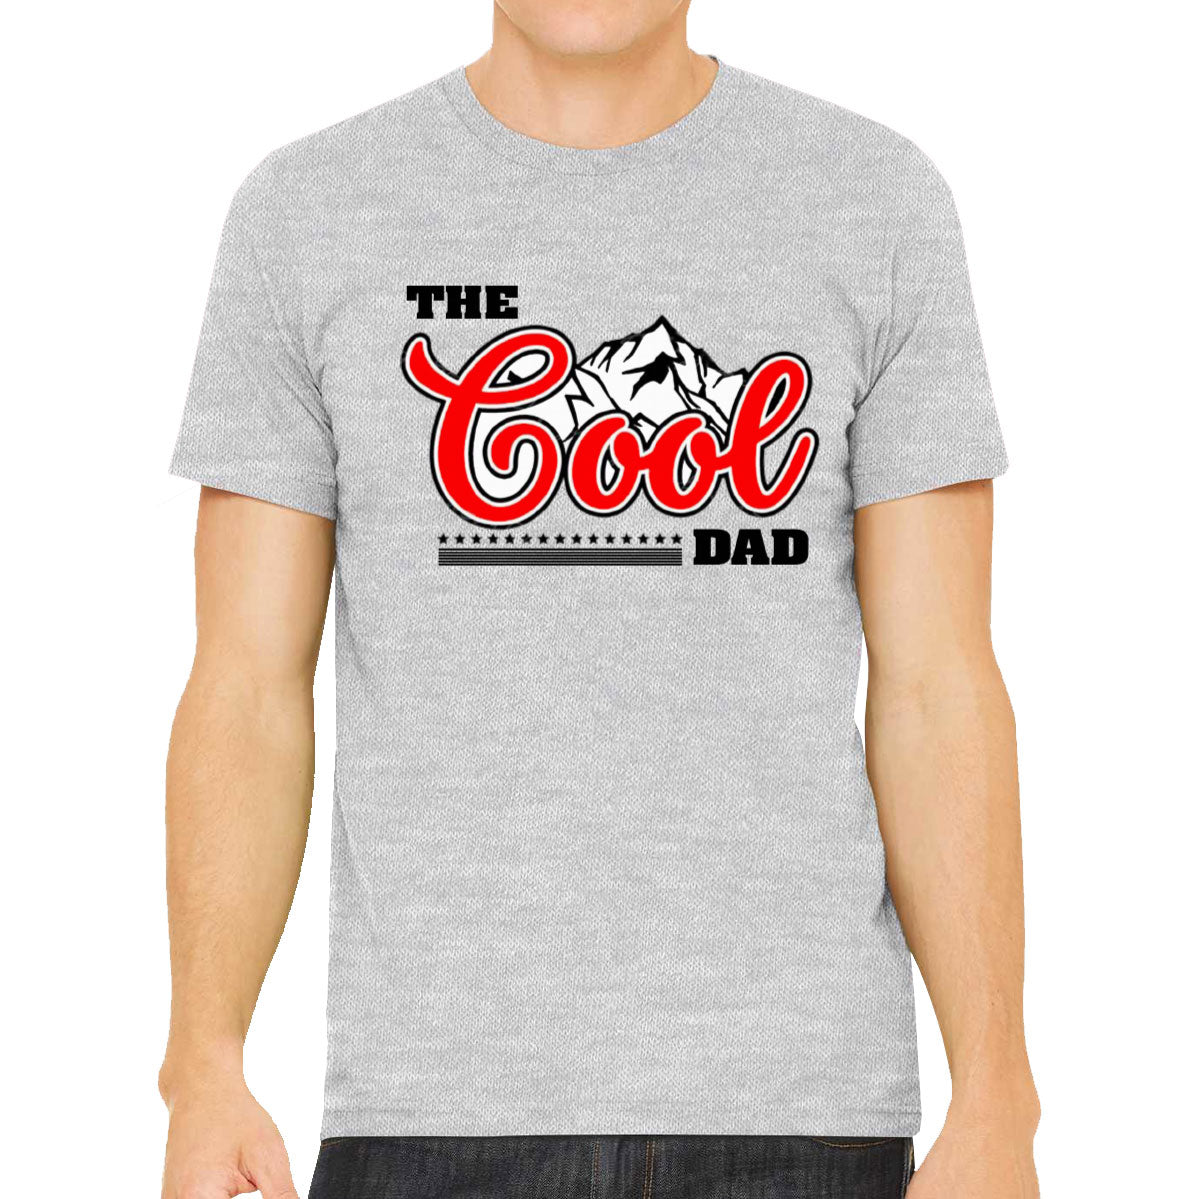 The Cool Dad Father's Day Men's T-shirt